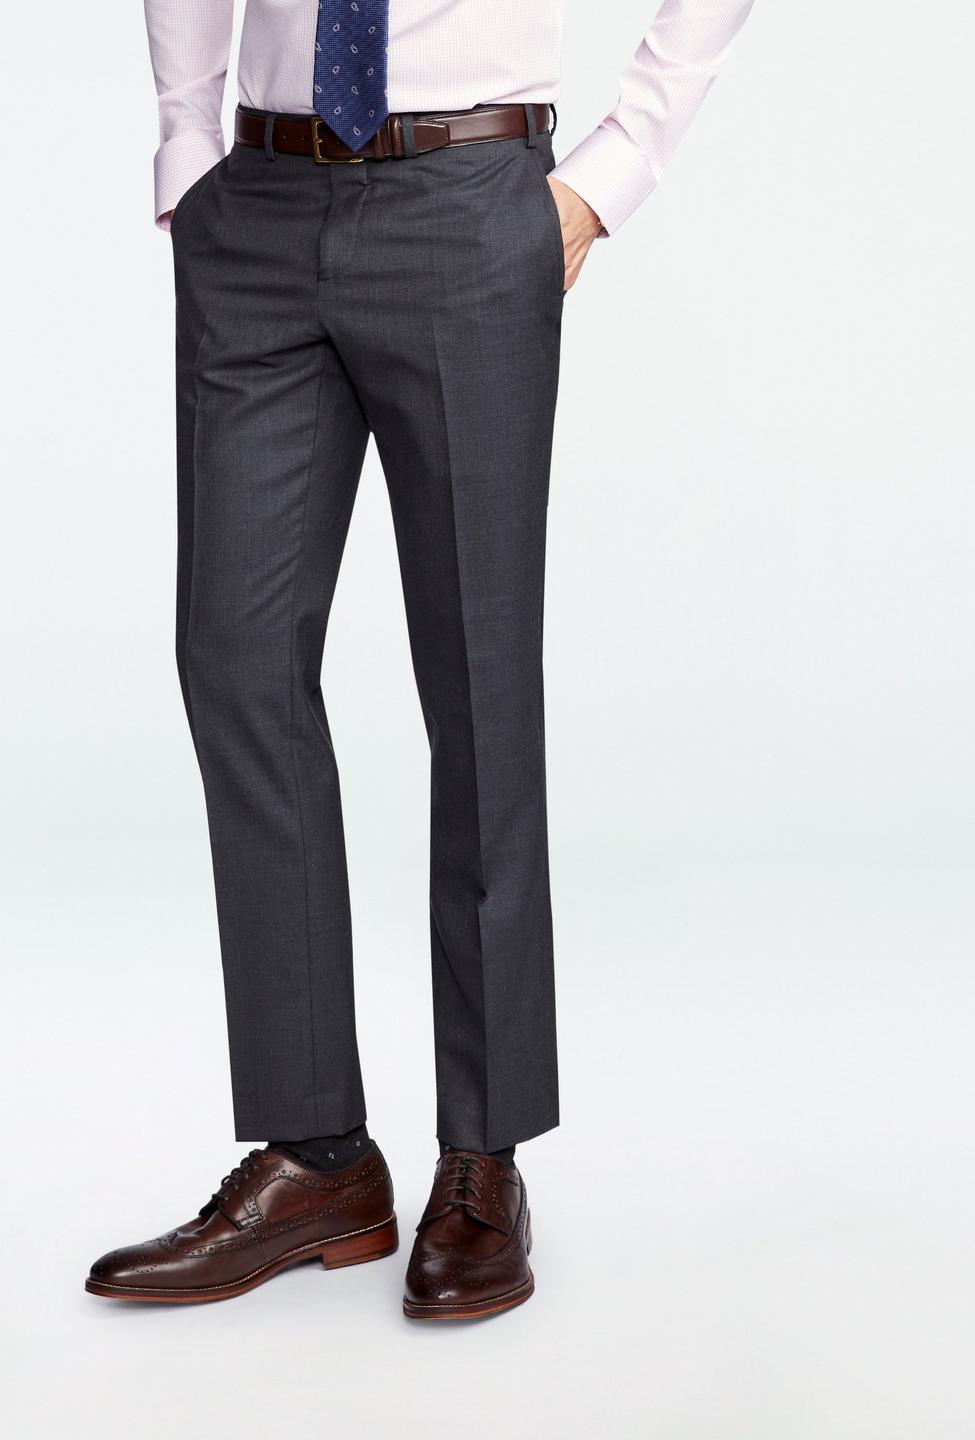 Gray pants - Solid Design from Luxury Indochino Collection